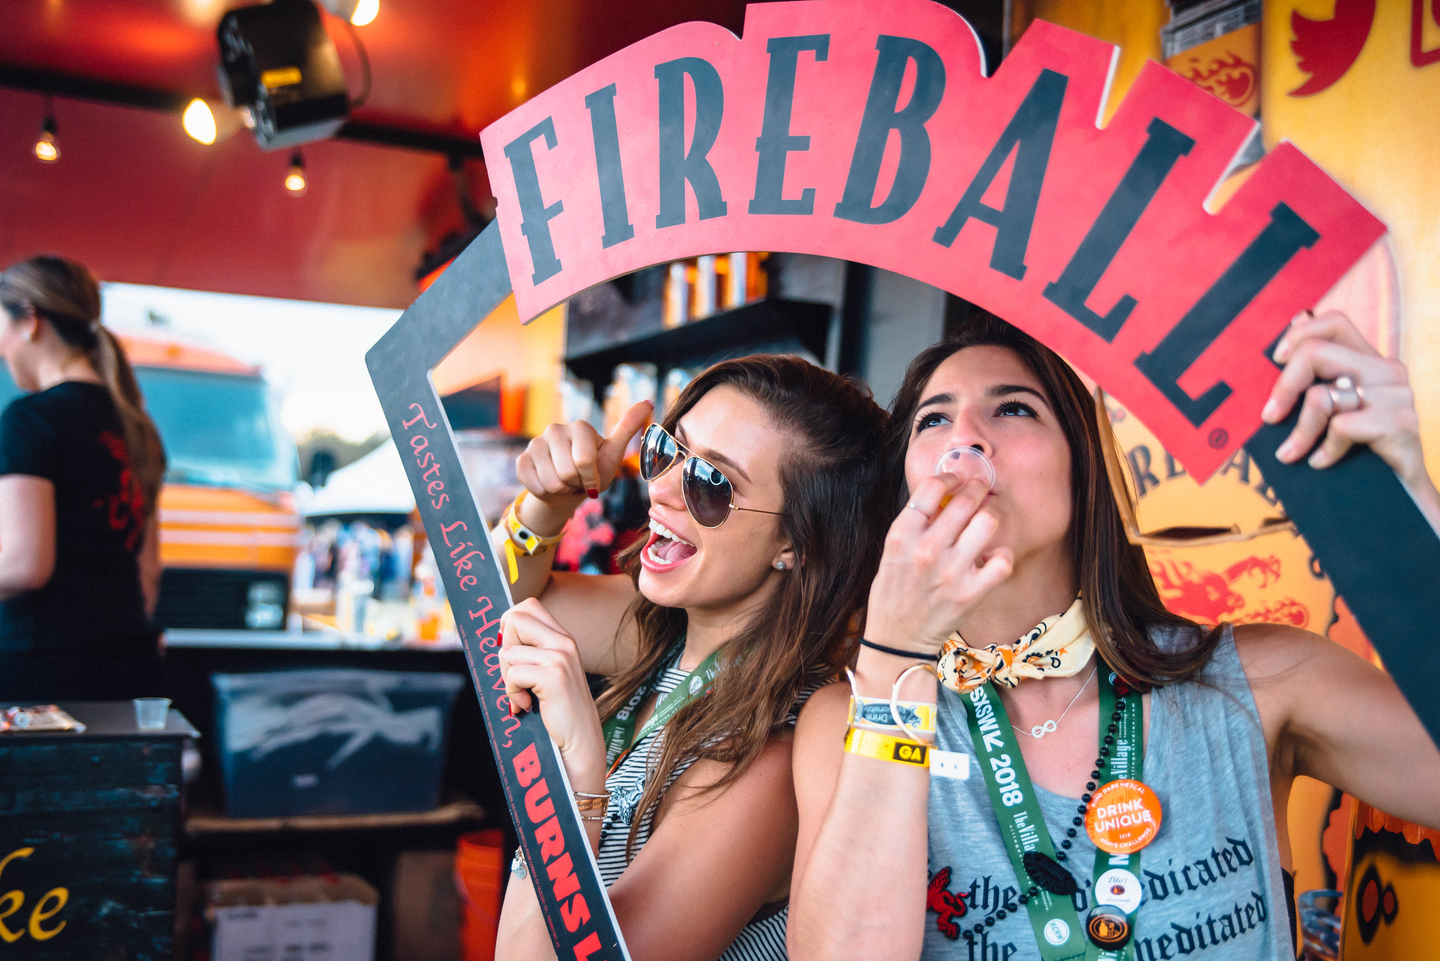 Fireball Whisky Bar is one of the eating and drinking options at the The SXSW Outdoor Stage presented by MGM Resorts.